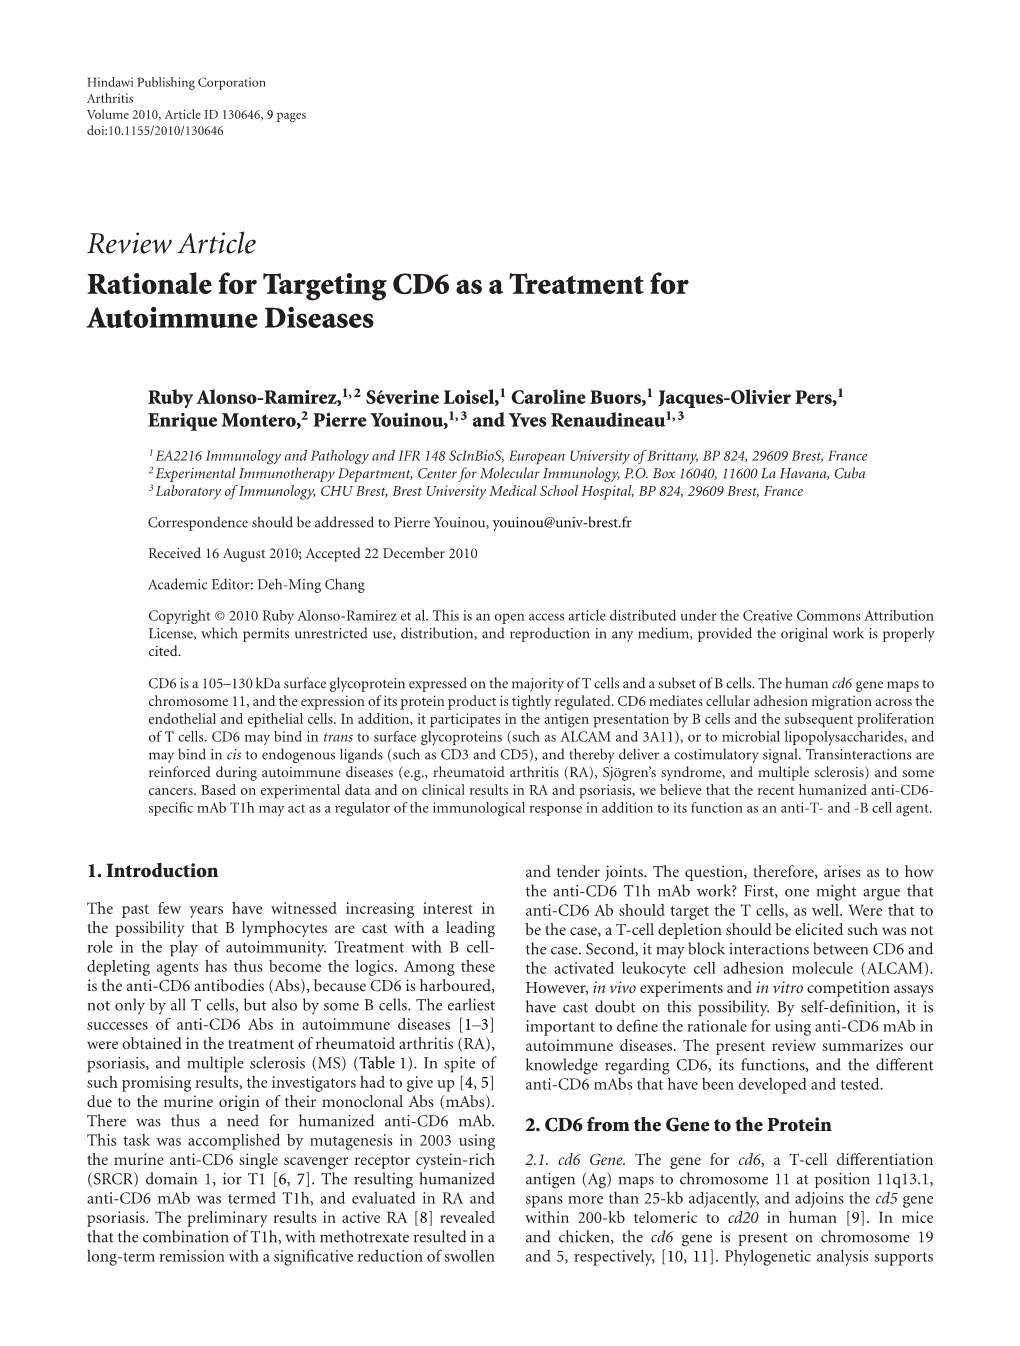 Review Article Rationale for Targeting CD6 As a Treatment for Autoimmune Diseases